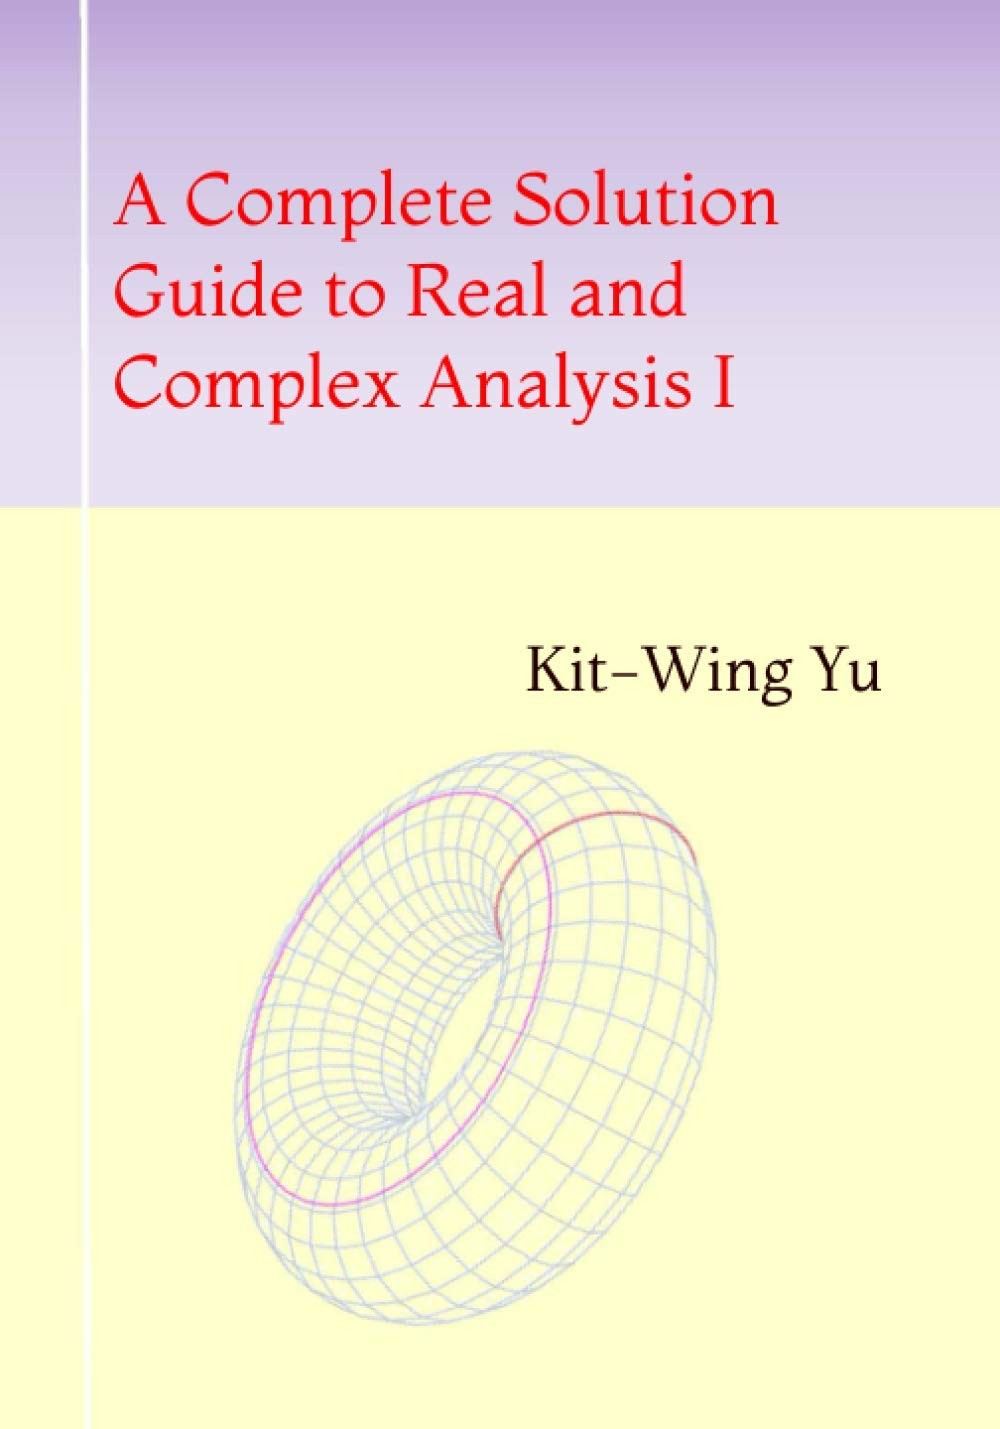 A Complete Solution Guide to Real and Complex Analysis I